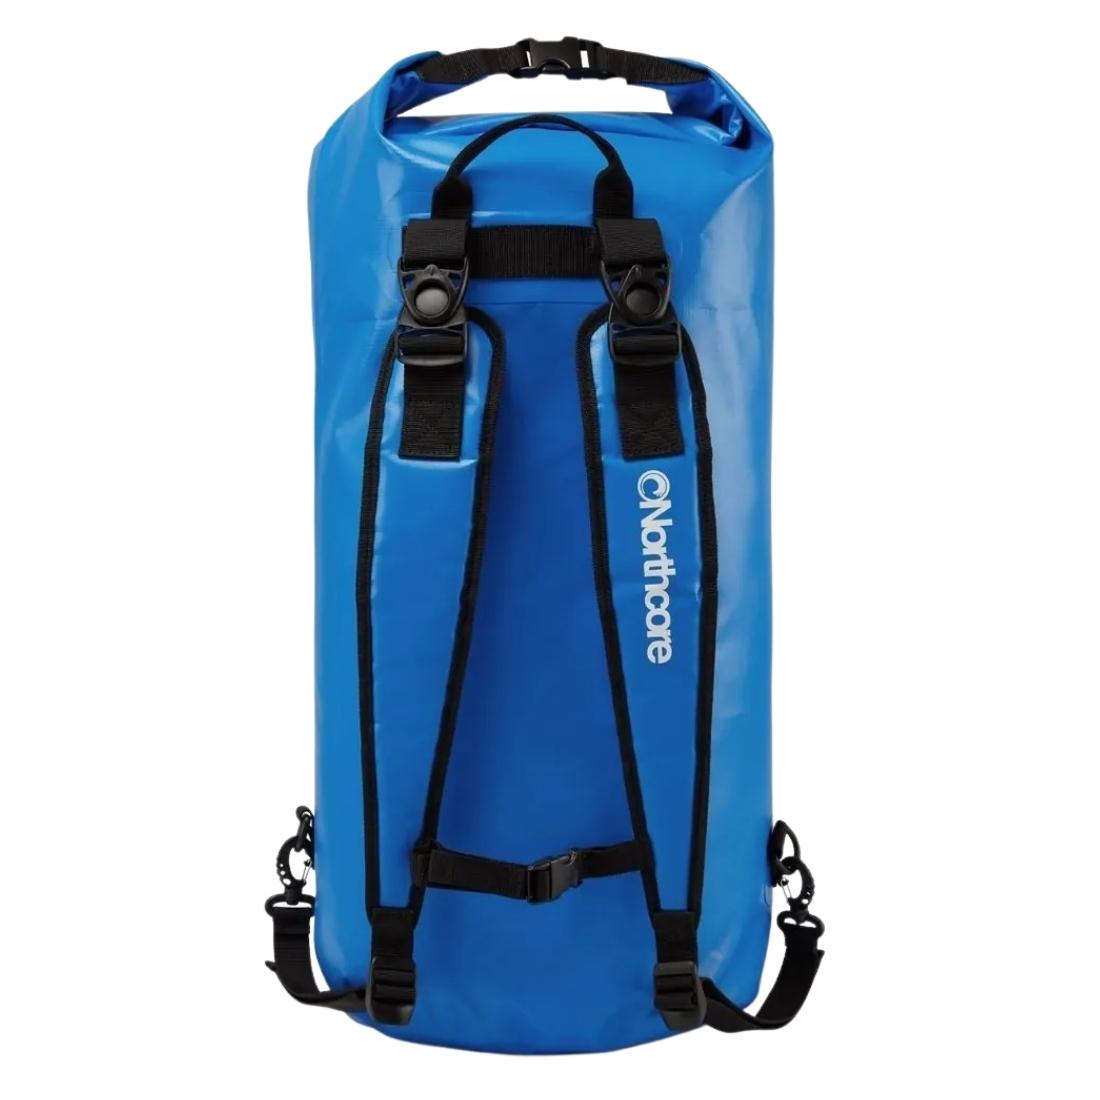 Northcore 30L Dry Bag Backpack - Blue - Wet/Dry Bag by Northcore 30L